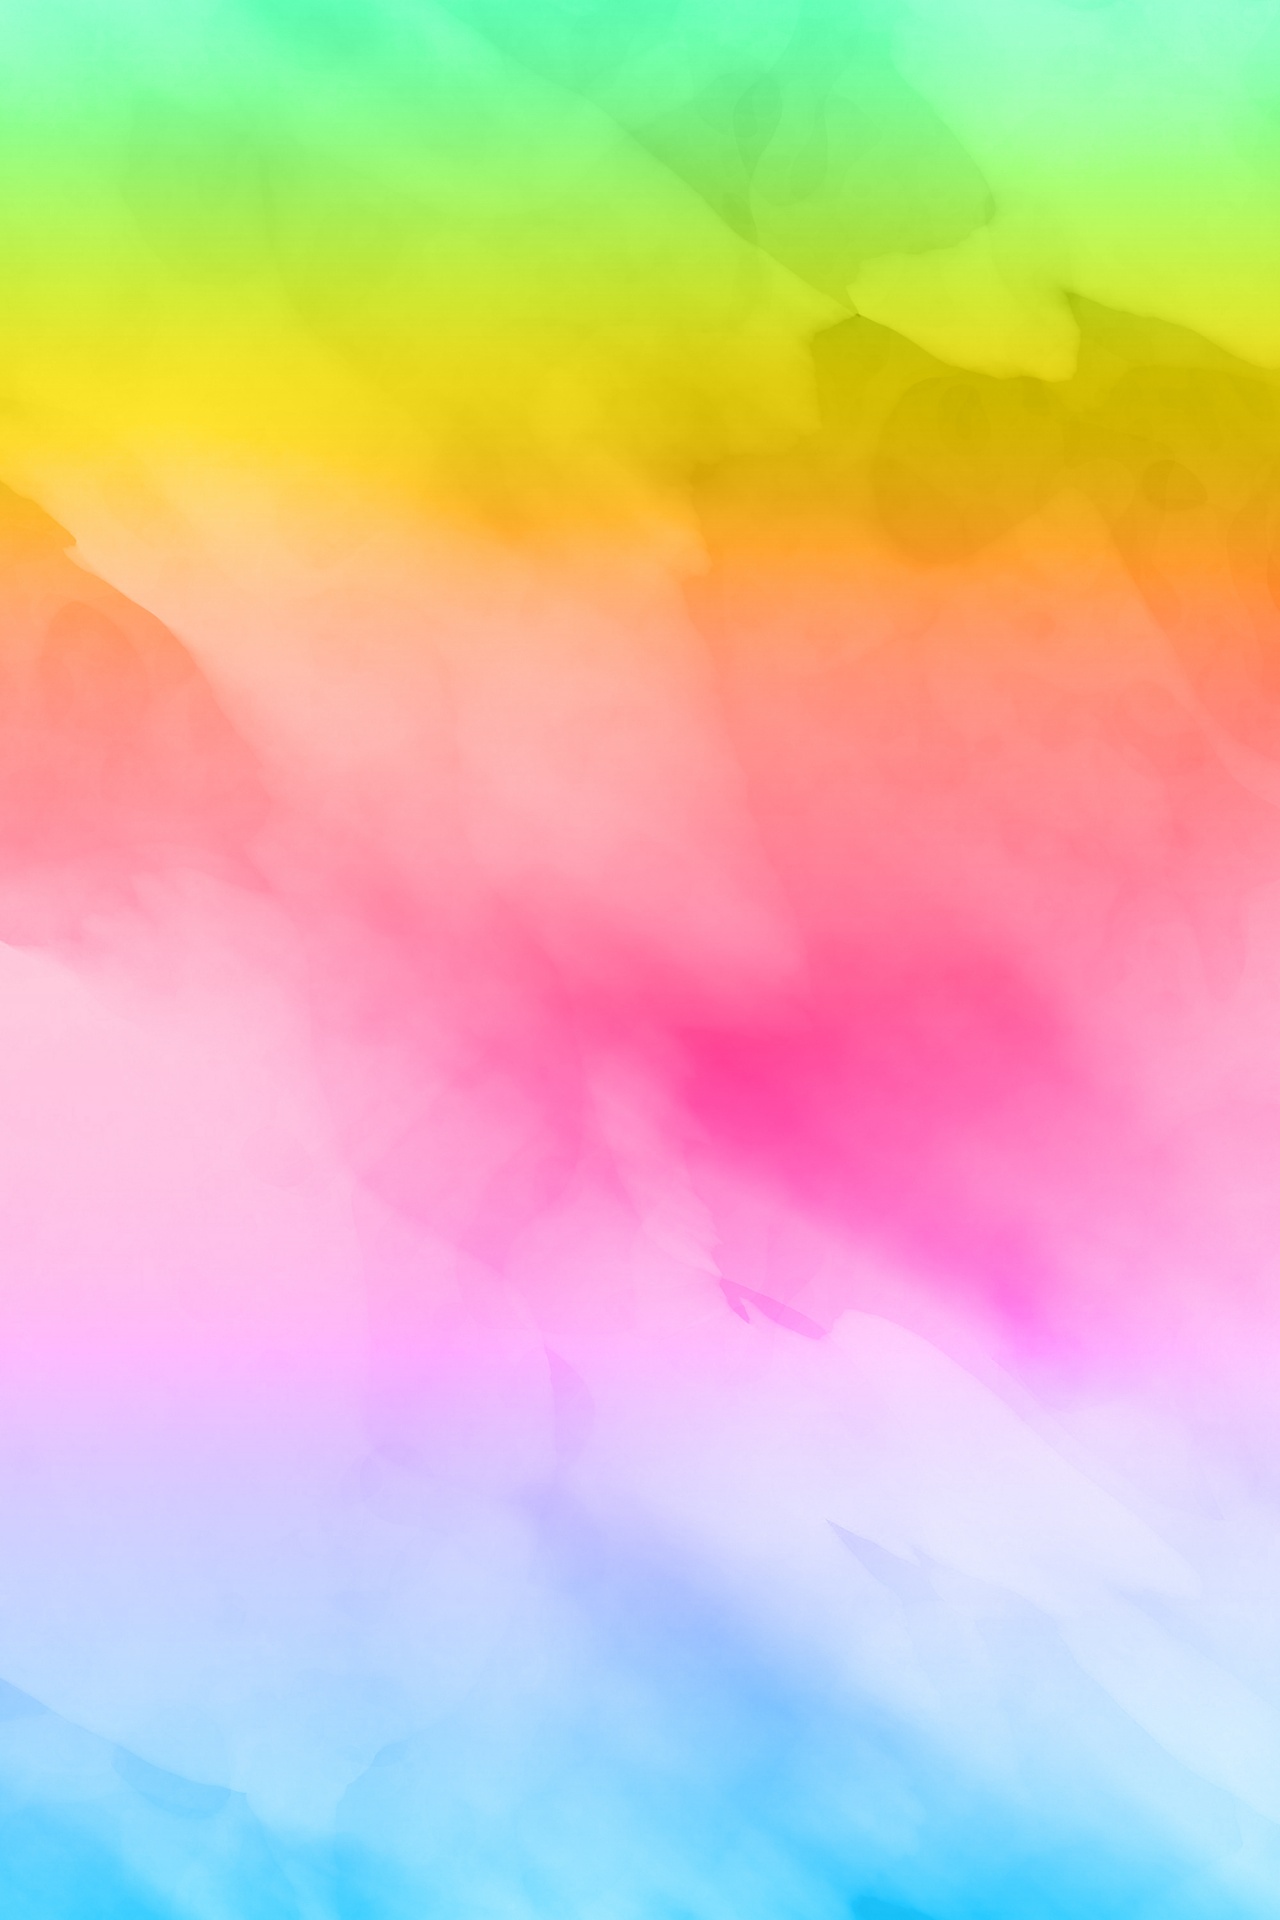 Abstract watercolor painting background in rainbow colors